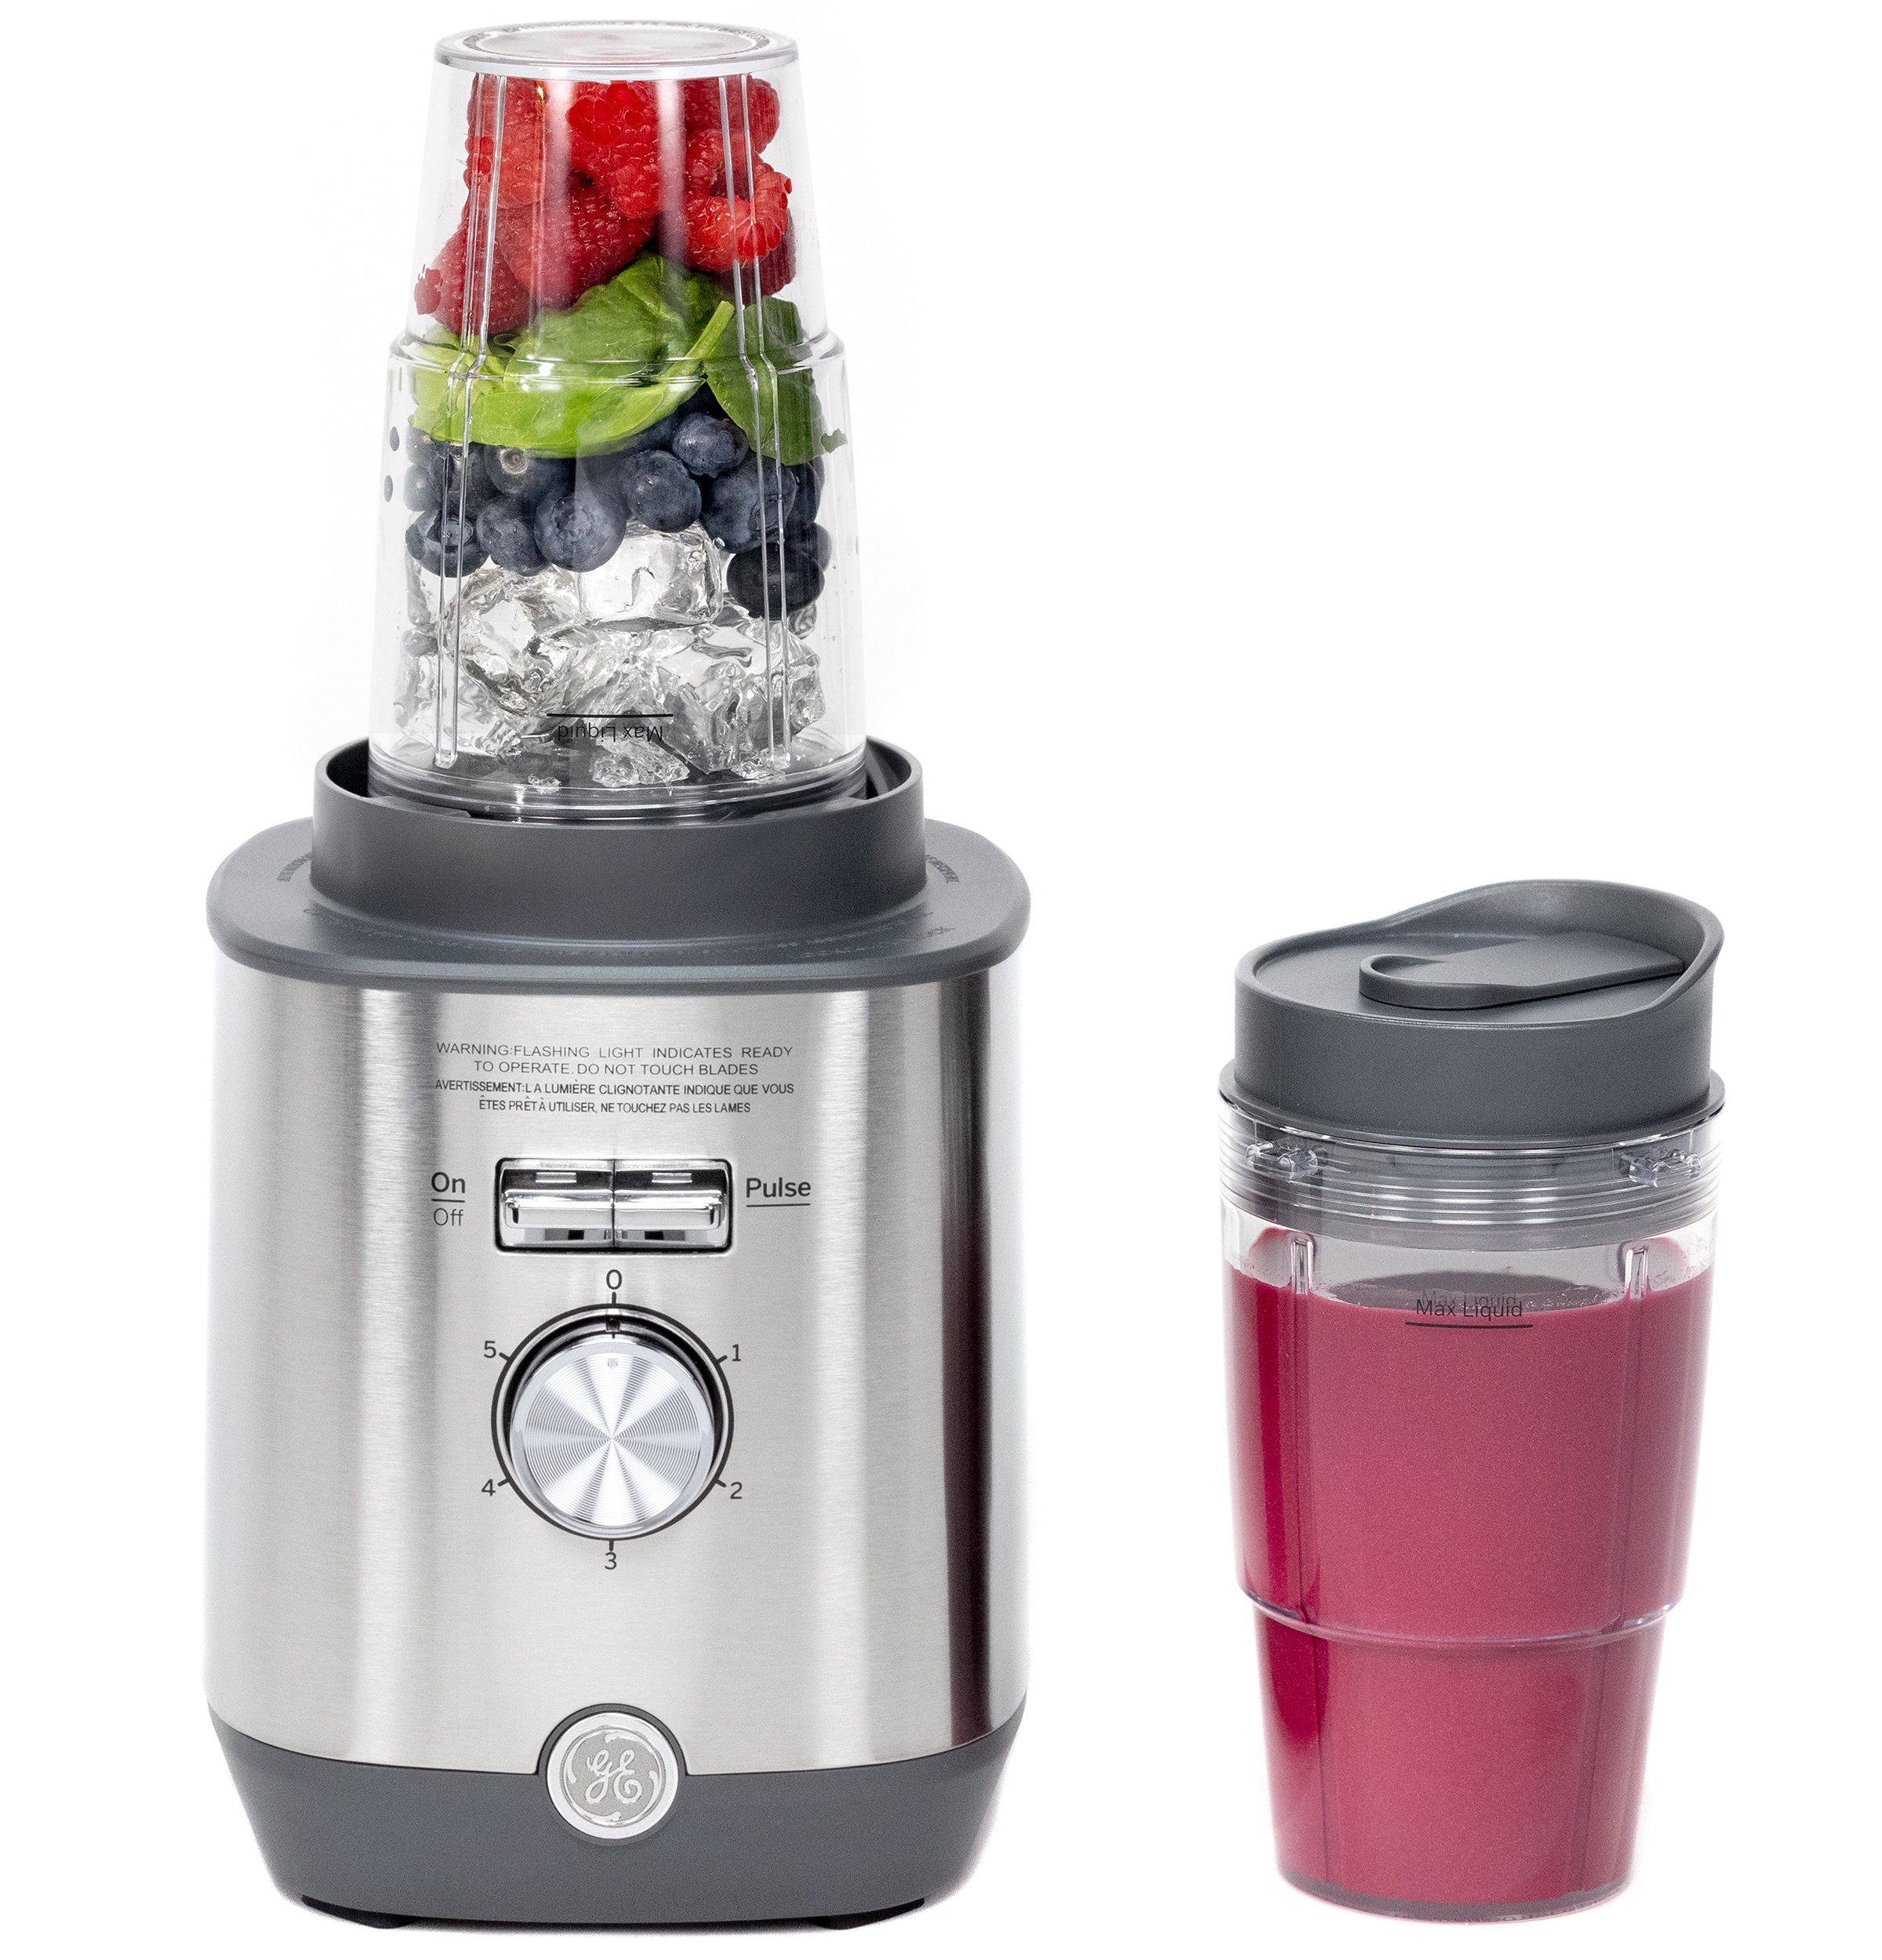 VEVOR Baby Food Maker, 500W Baby Food Processor with 300 ml Glass